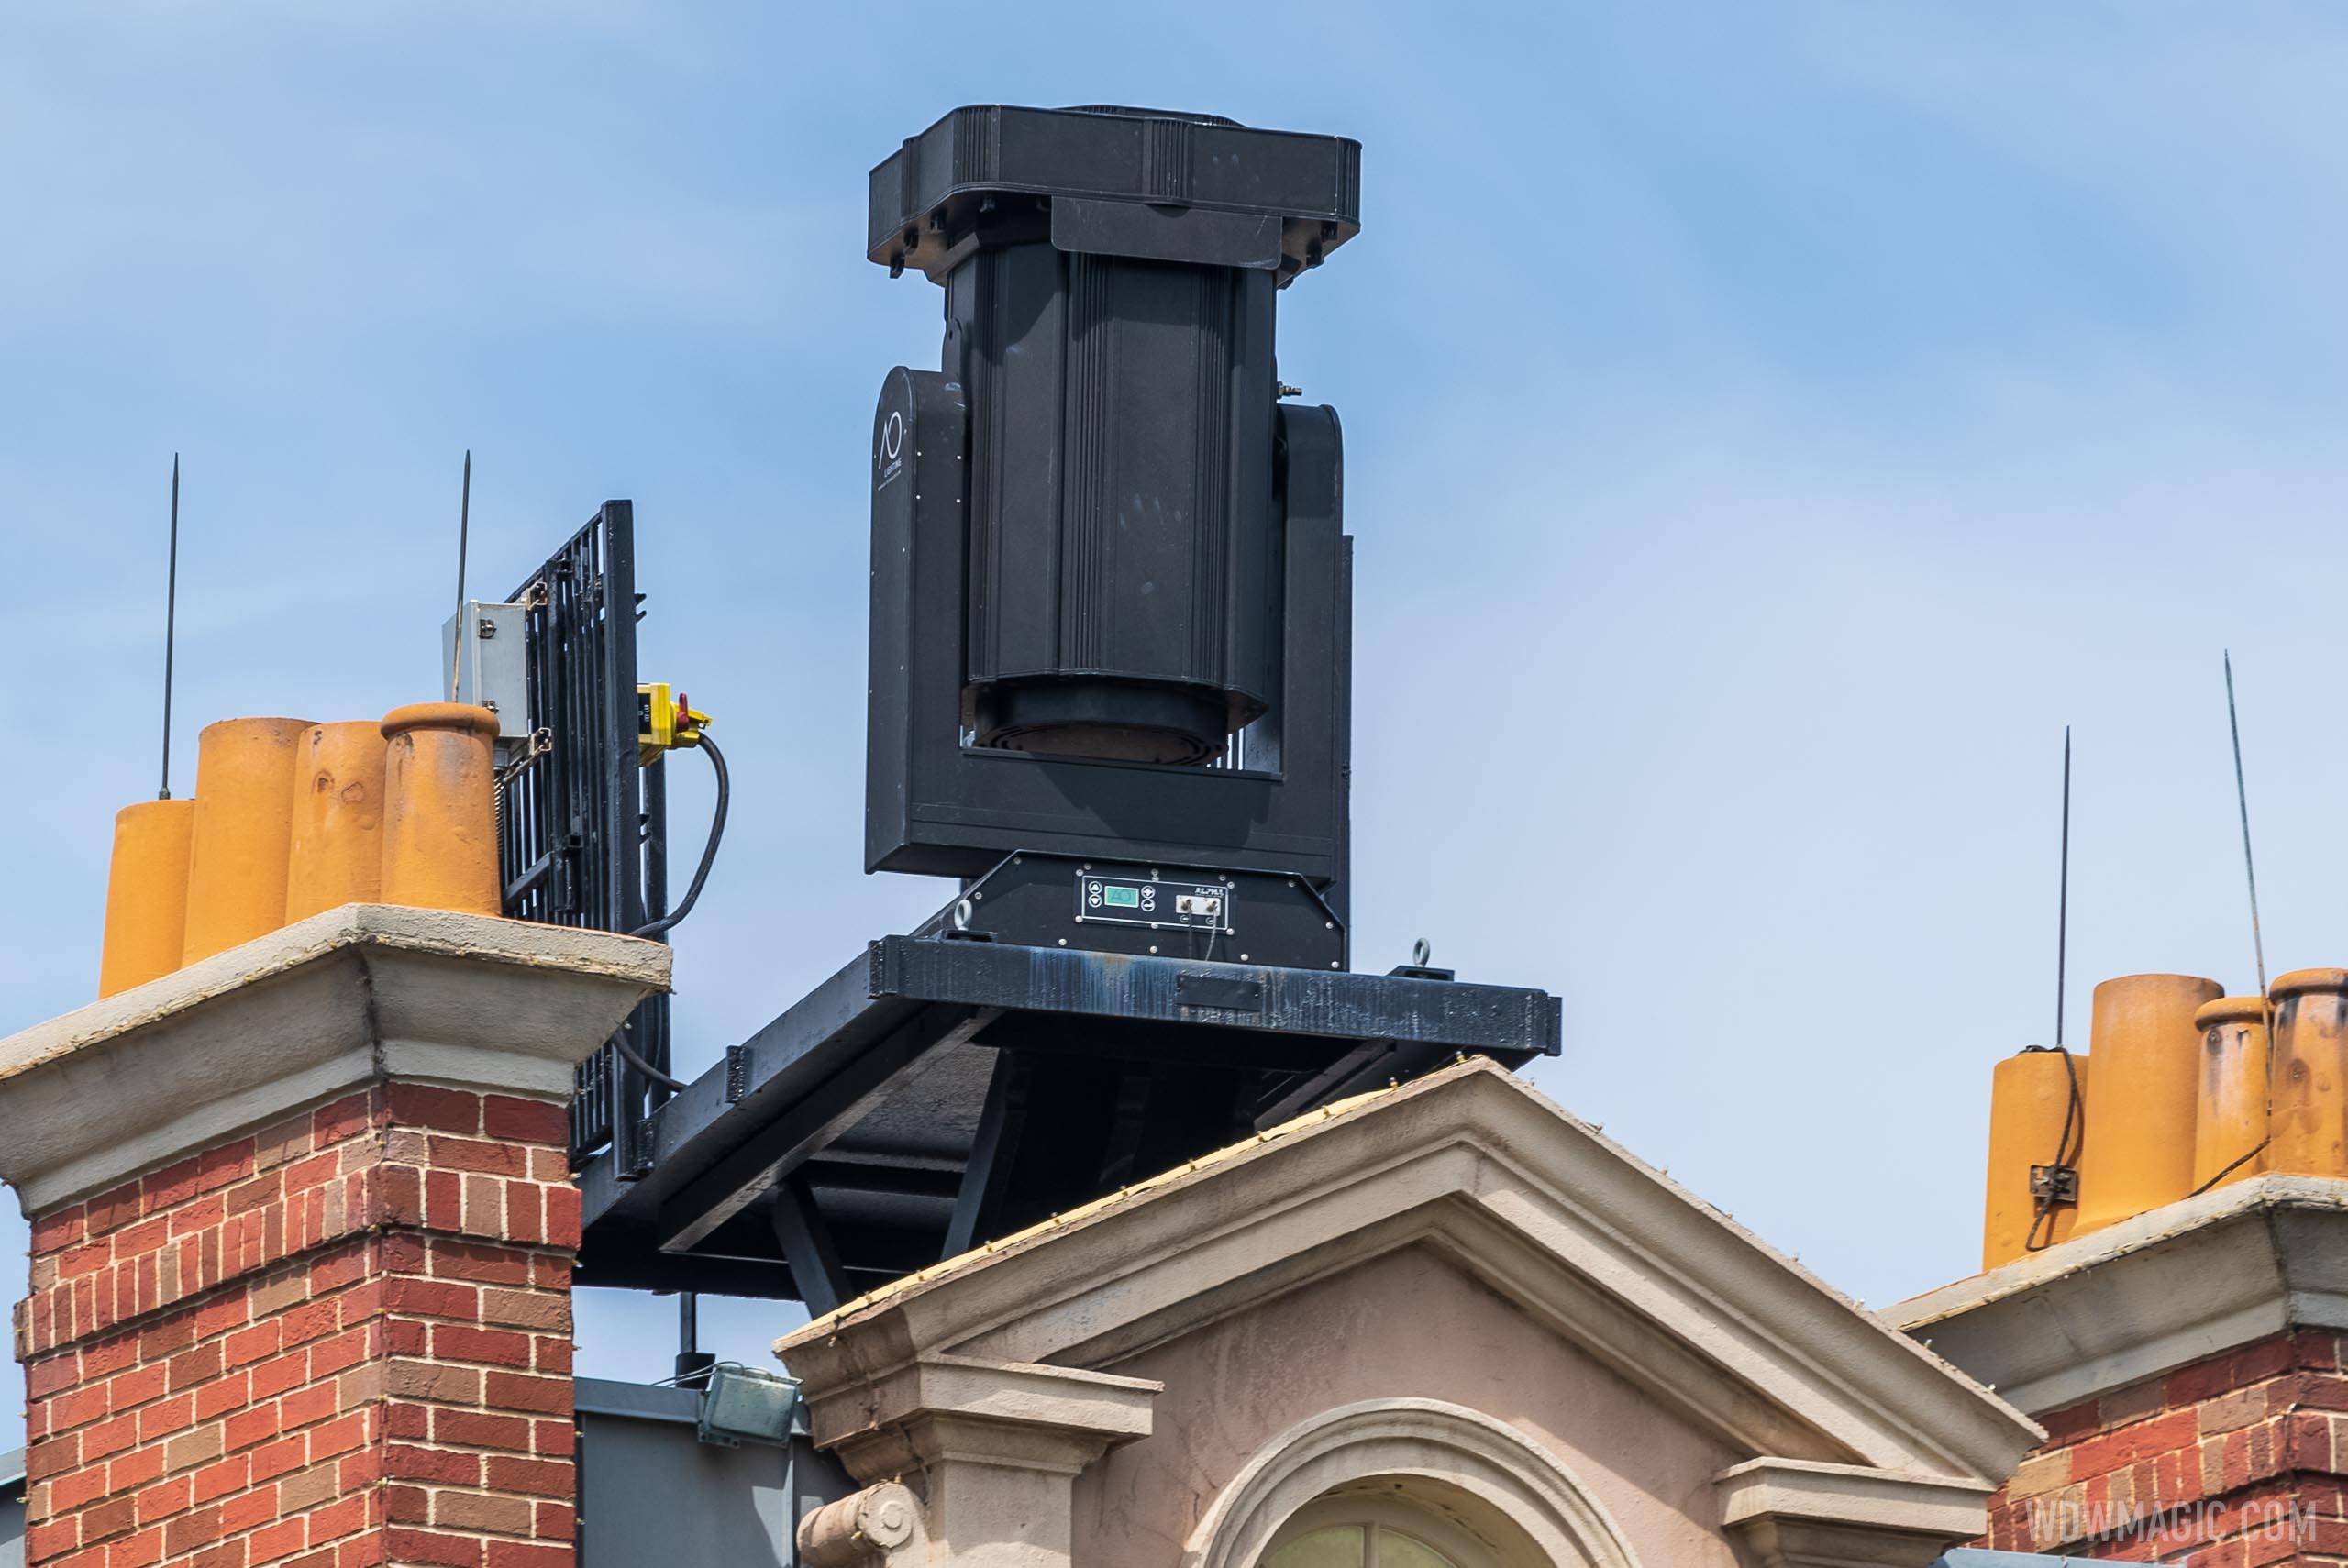 EPCOT Harmonious Alpha One Falcon searchlight rooftop mounted at the France pavilion